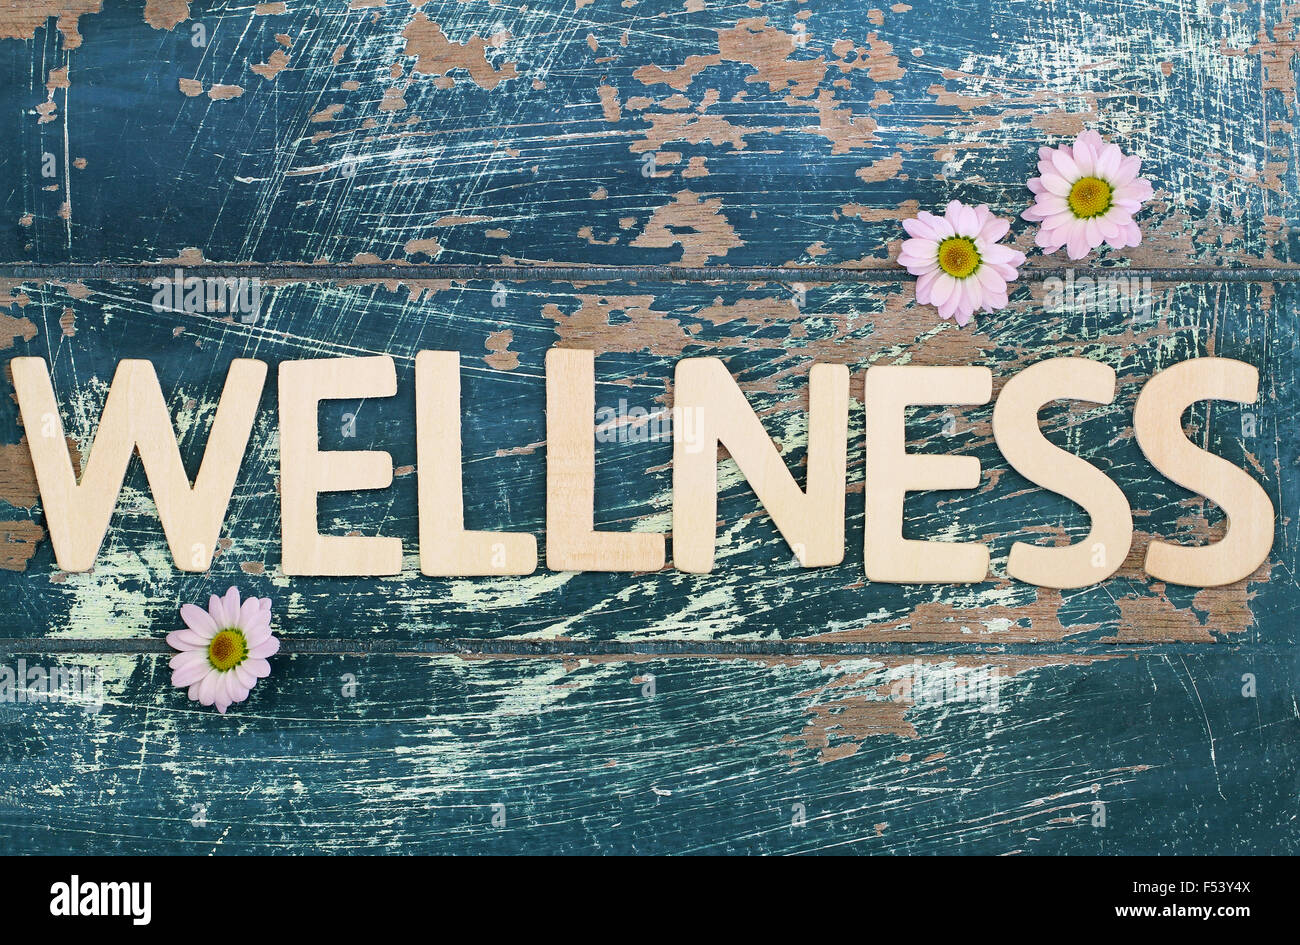 Wellness written on rustic wooden surface and pink daisy flowers Stock Photo